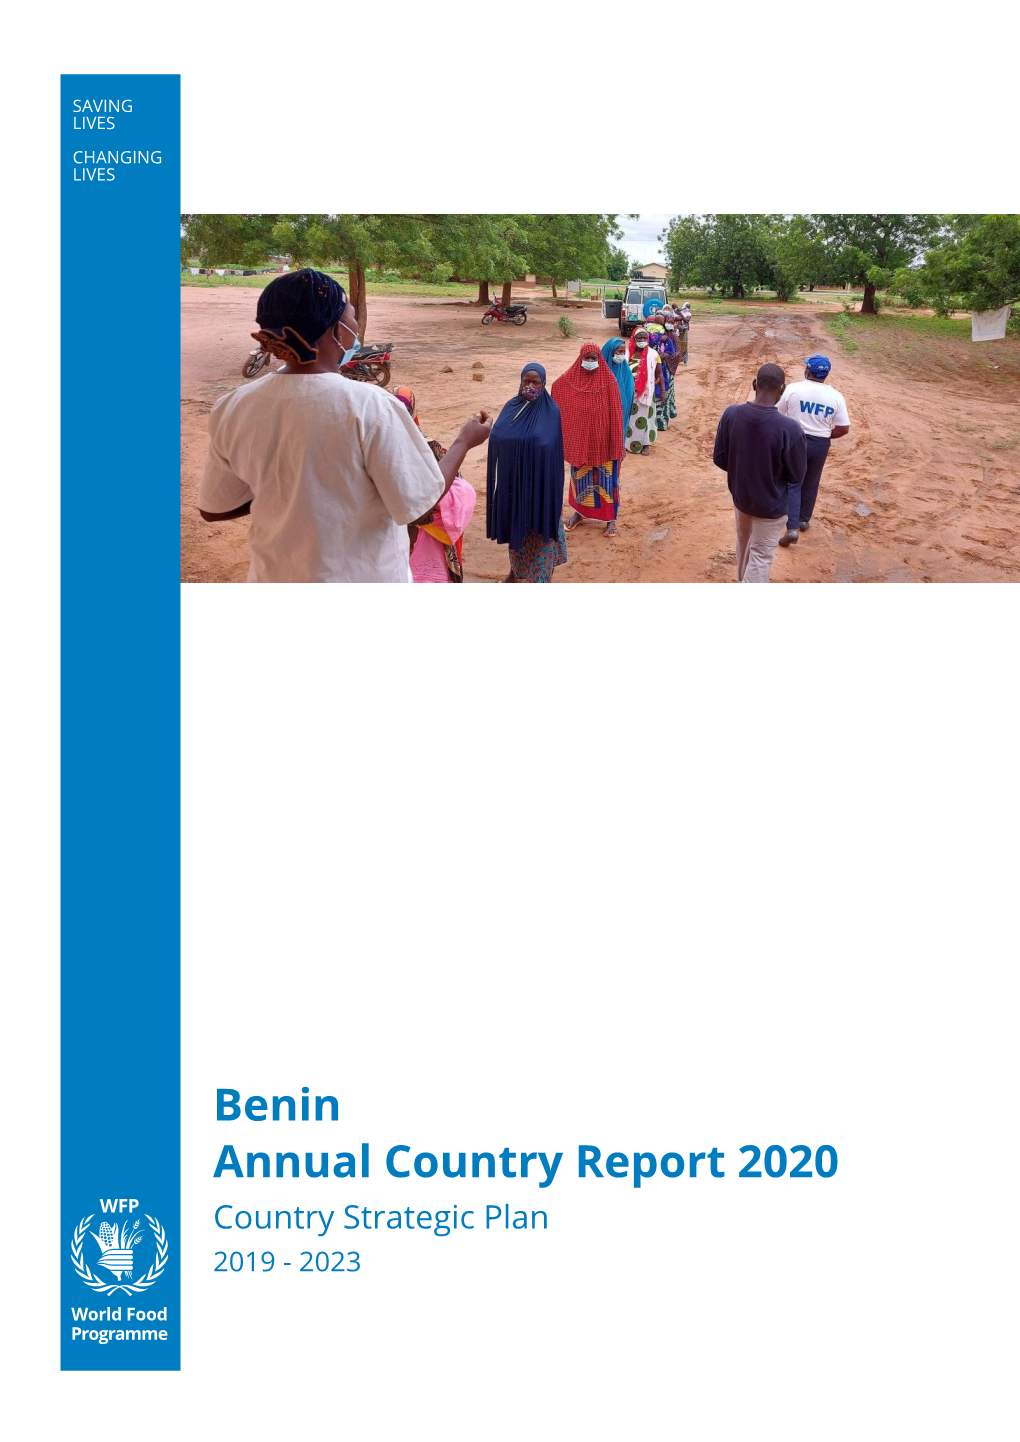 Benin Annual Country Report 2020 Country Strategic Plan 2019 - 2023 Table of Contents